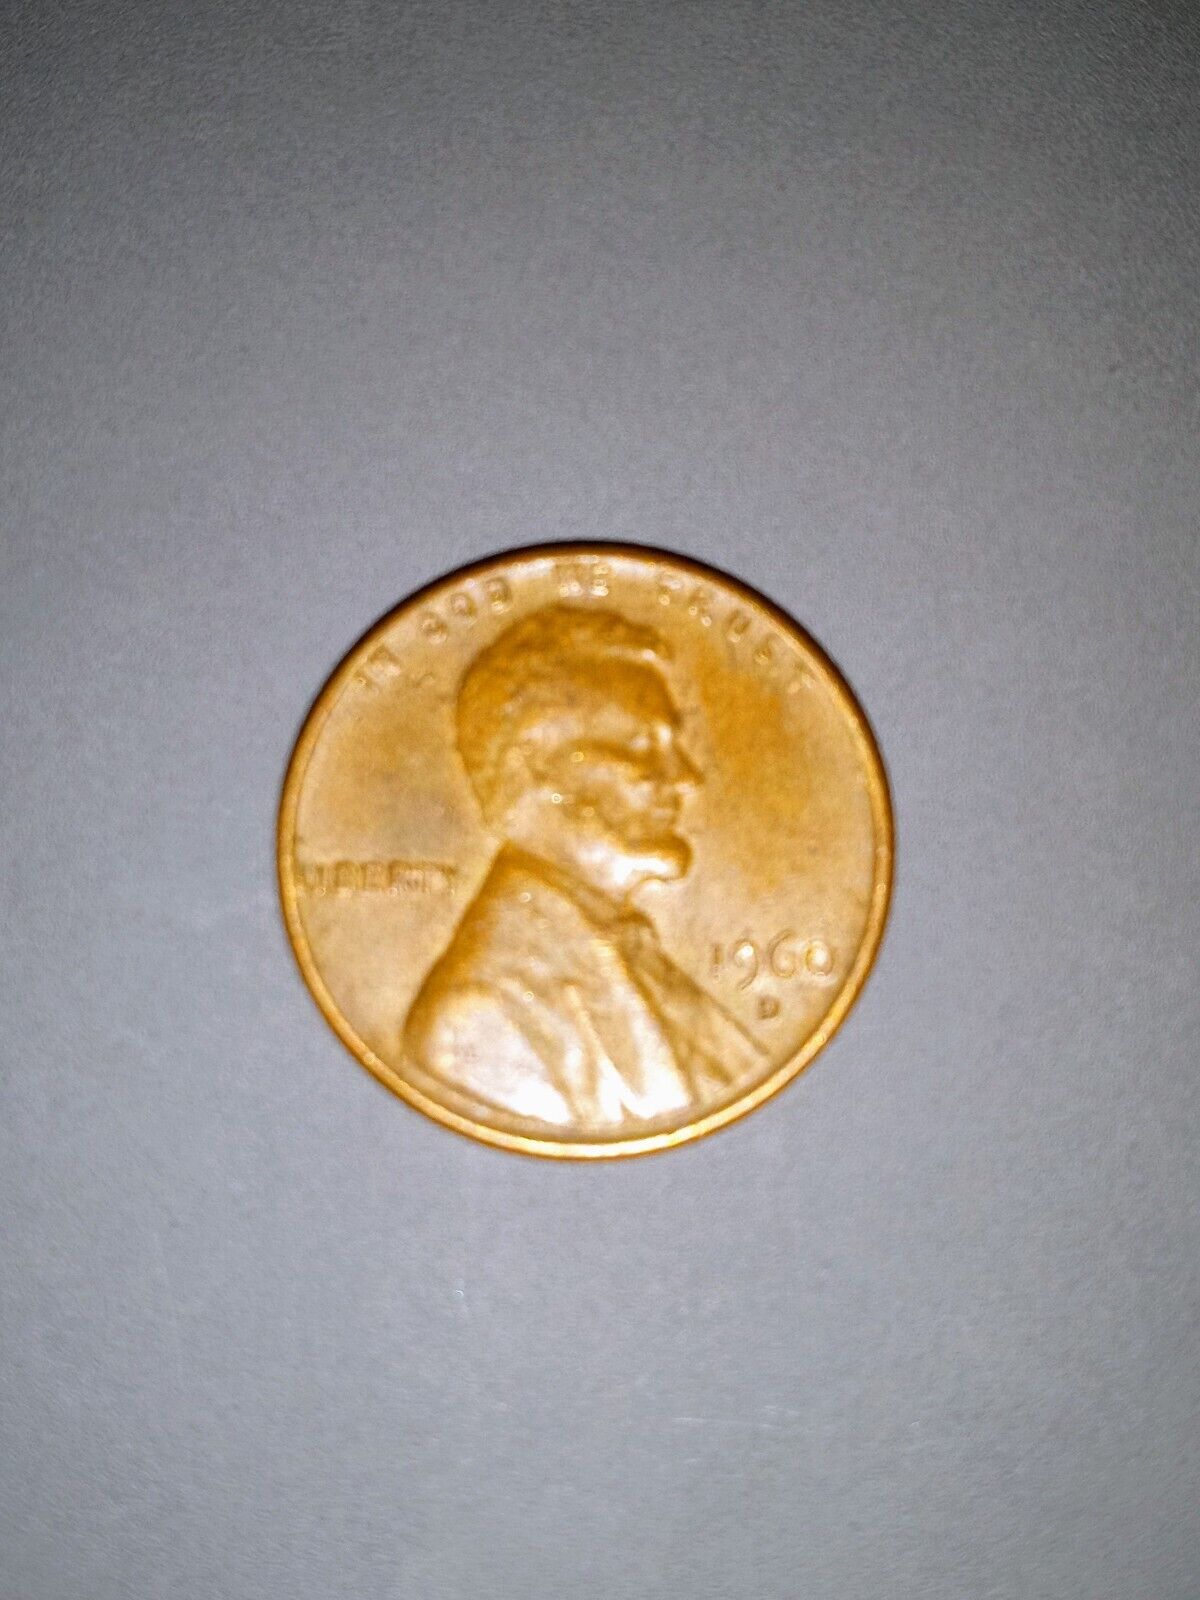 1960 D LARGE DATE LINCOLN PENNY CIRCULATED 